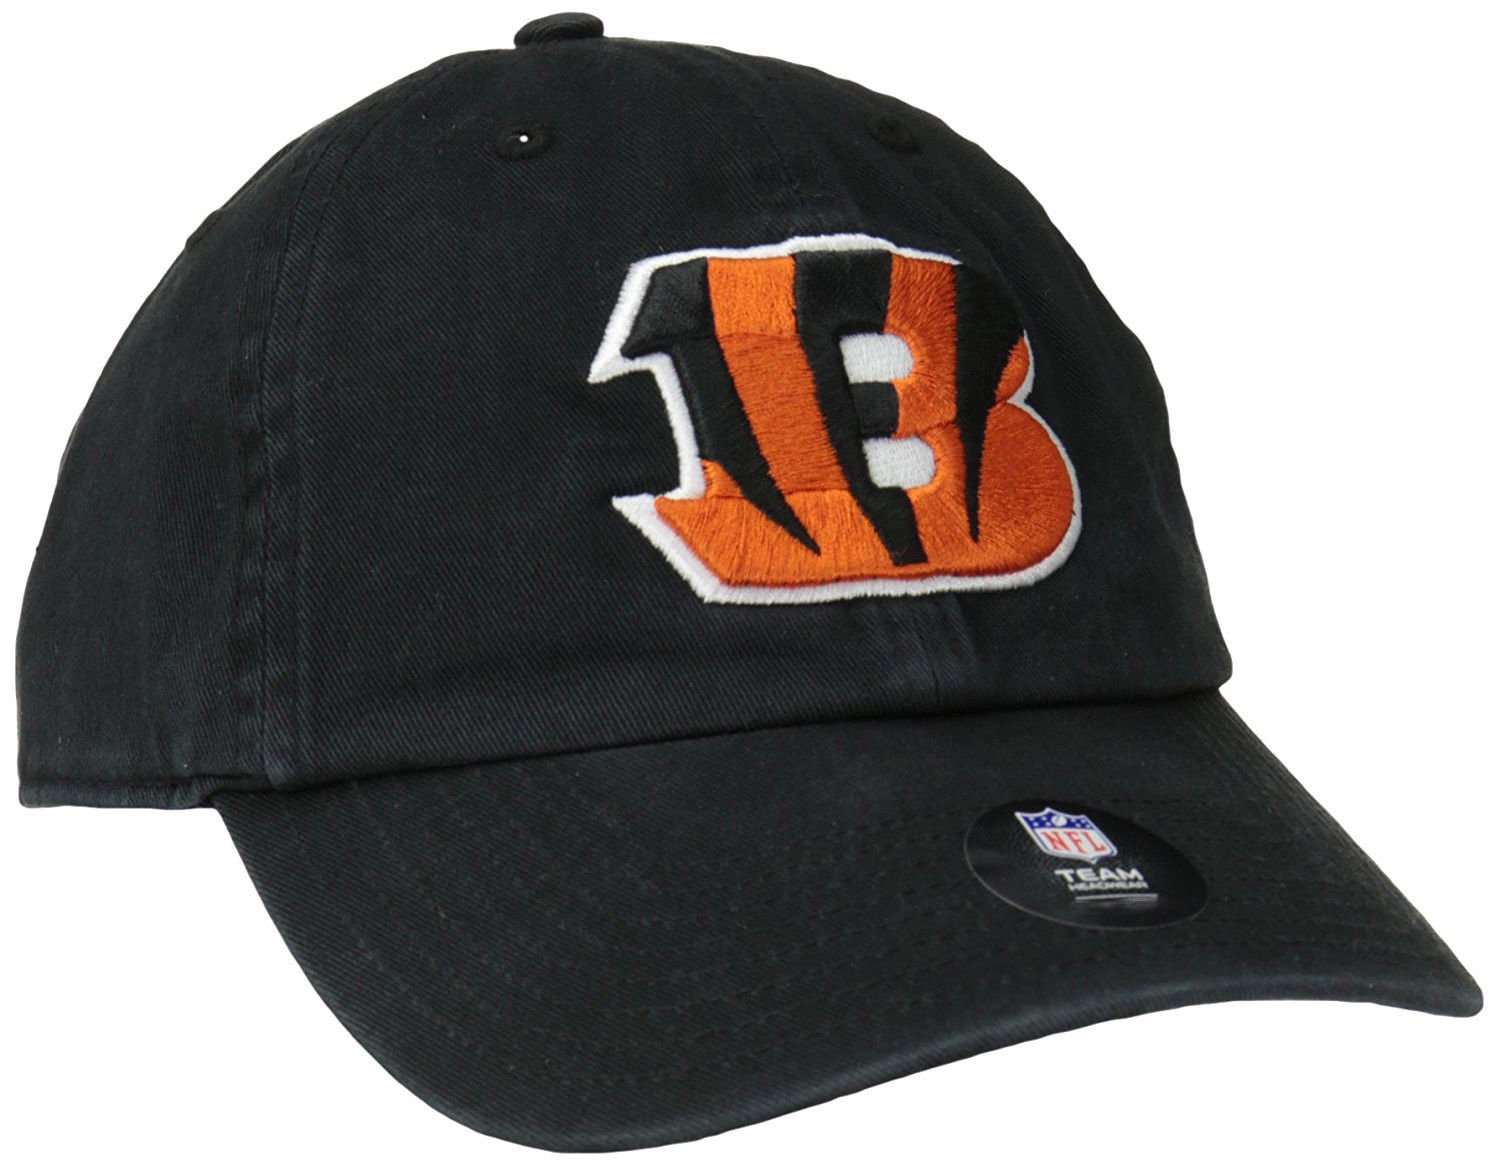 '47 Brand NFL Franchise Cincinnati Bengals Fitted Hat NWT 100% Cotton